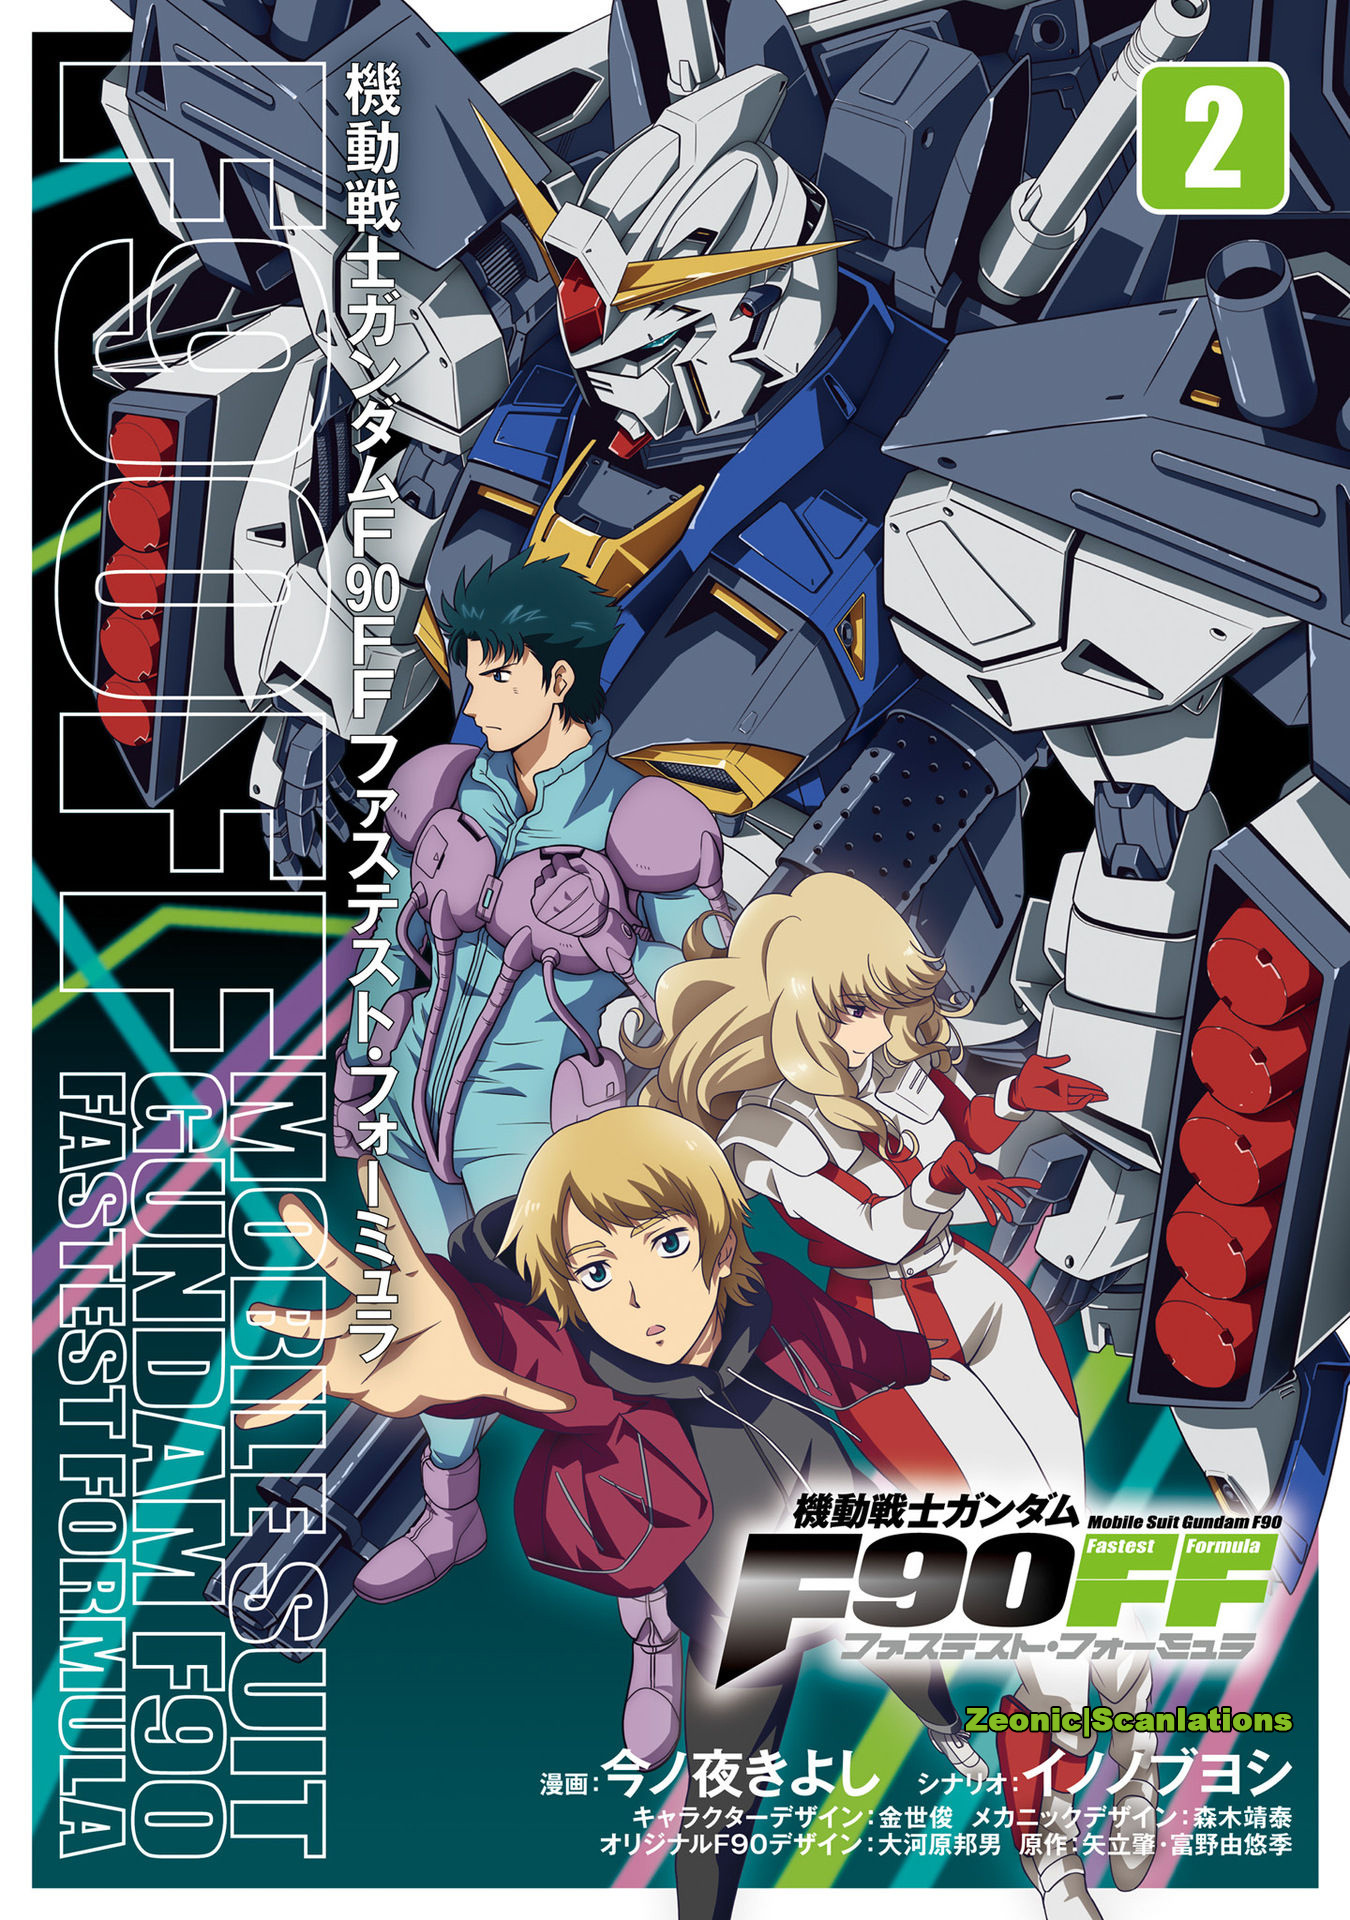 Mobile Suit Gundam F90 Ff Chapter 4.5 #2